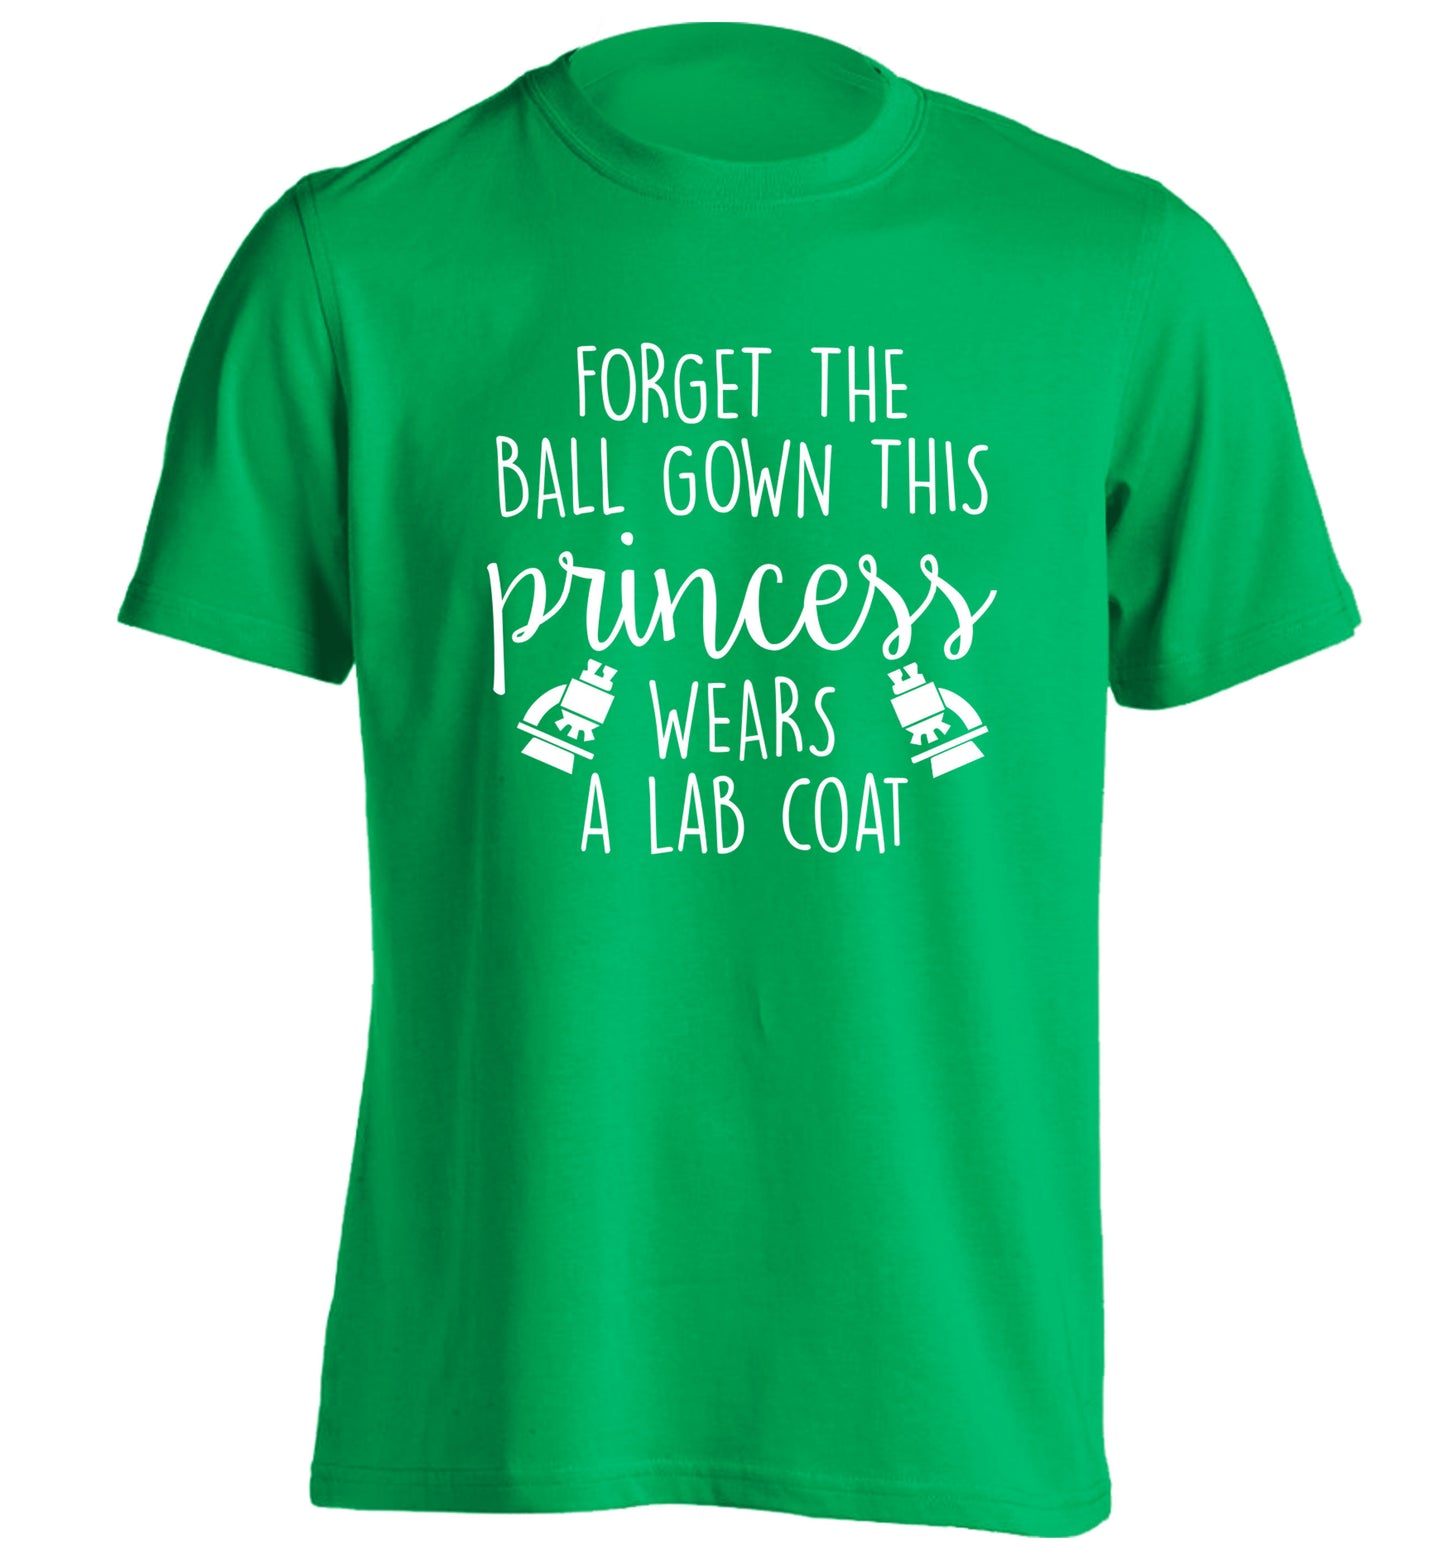 Forget the ball gown this princess wears a lab coat adults unisex green Tshirt 2XL